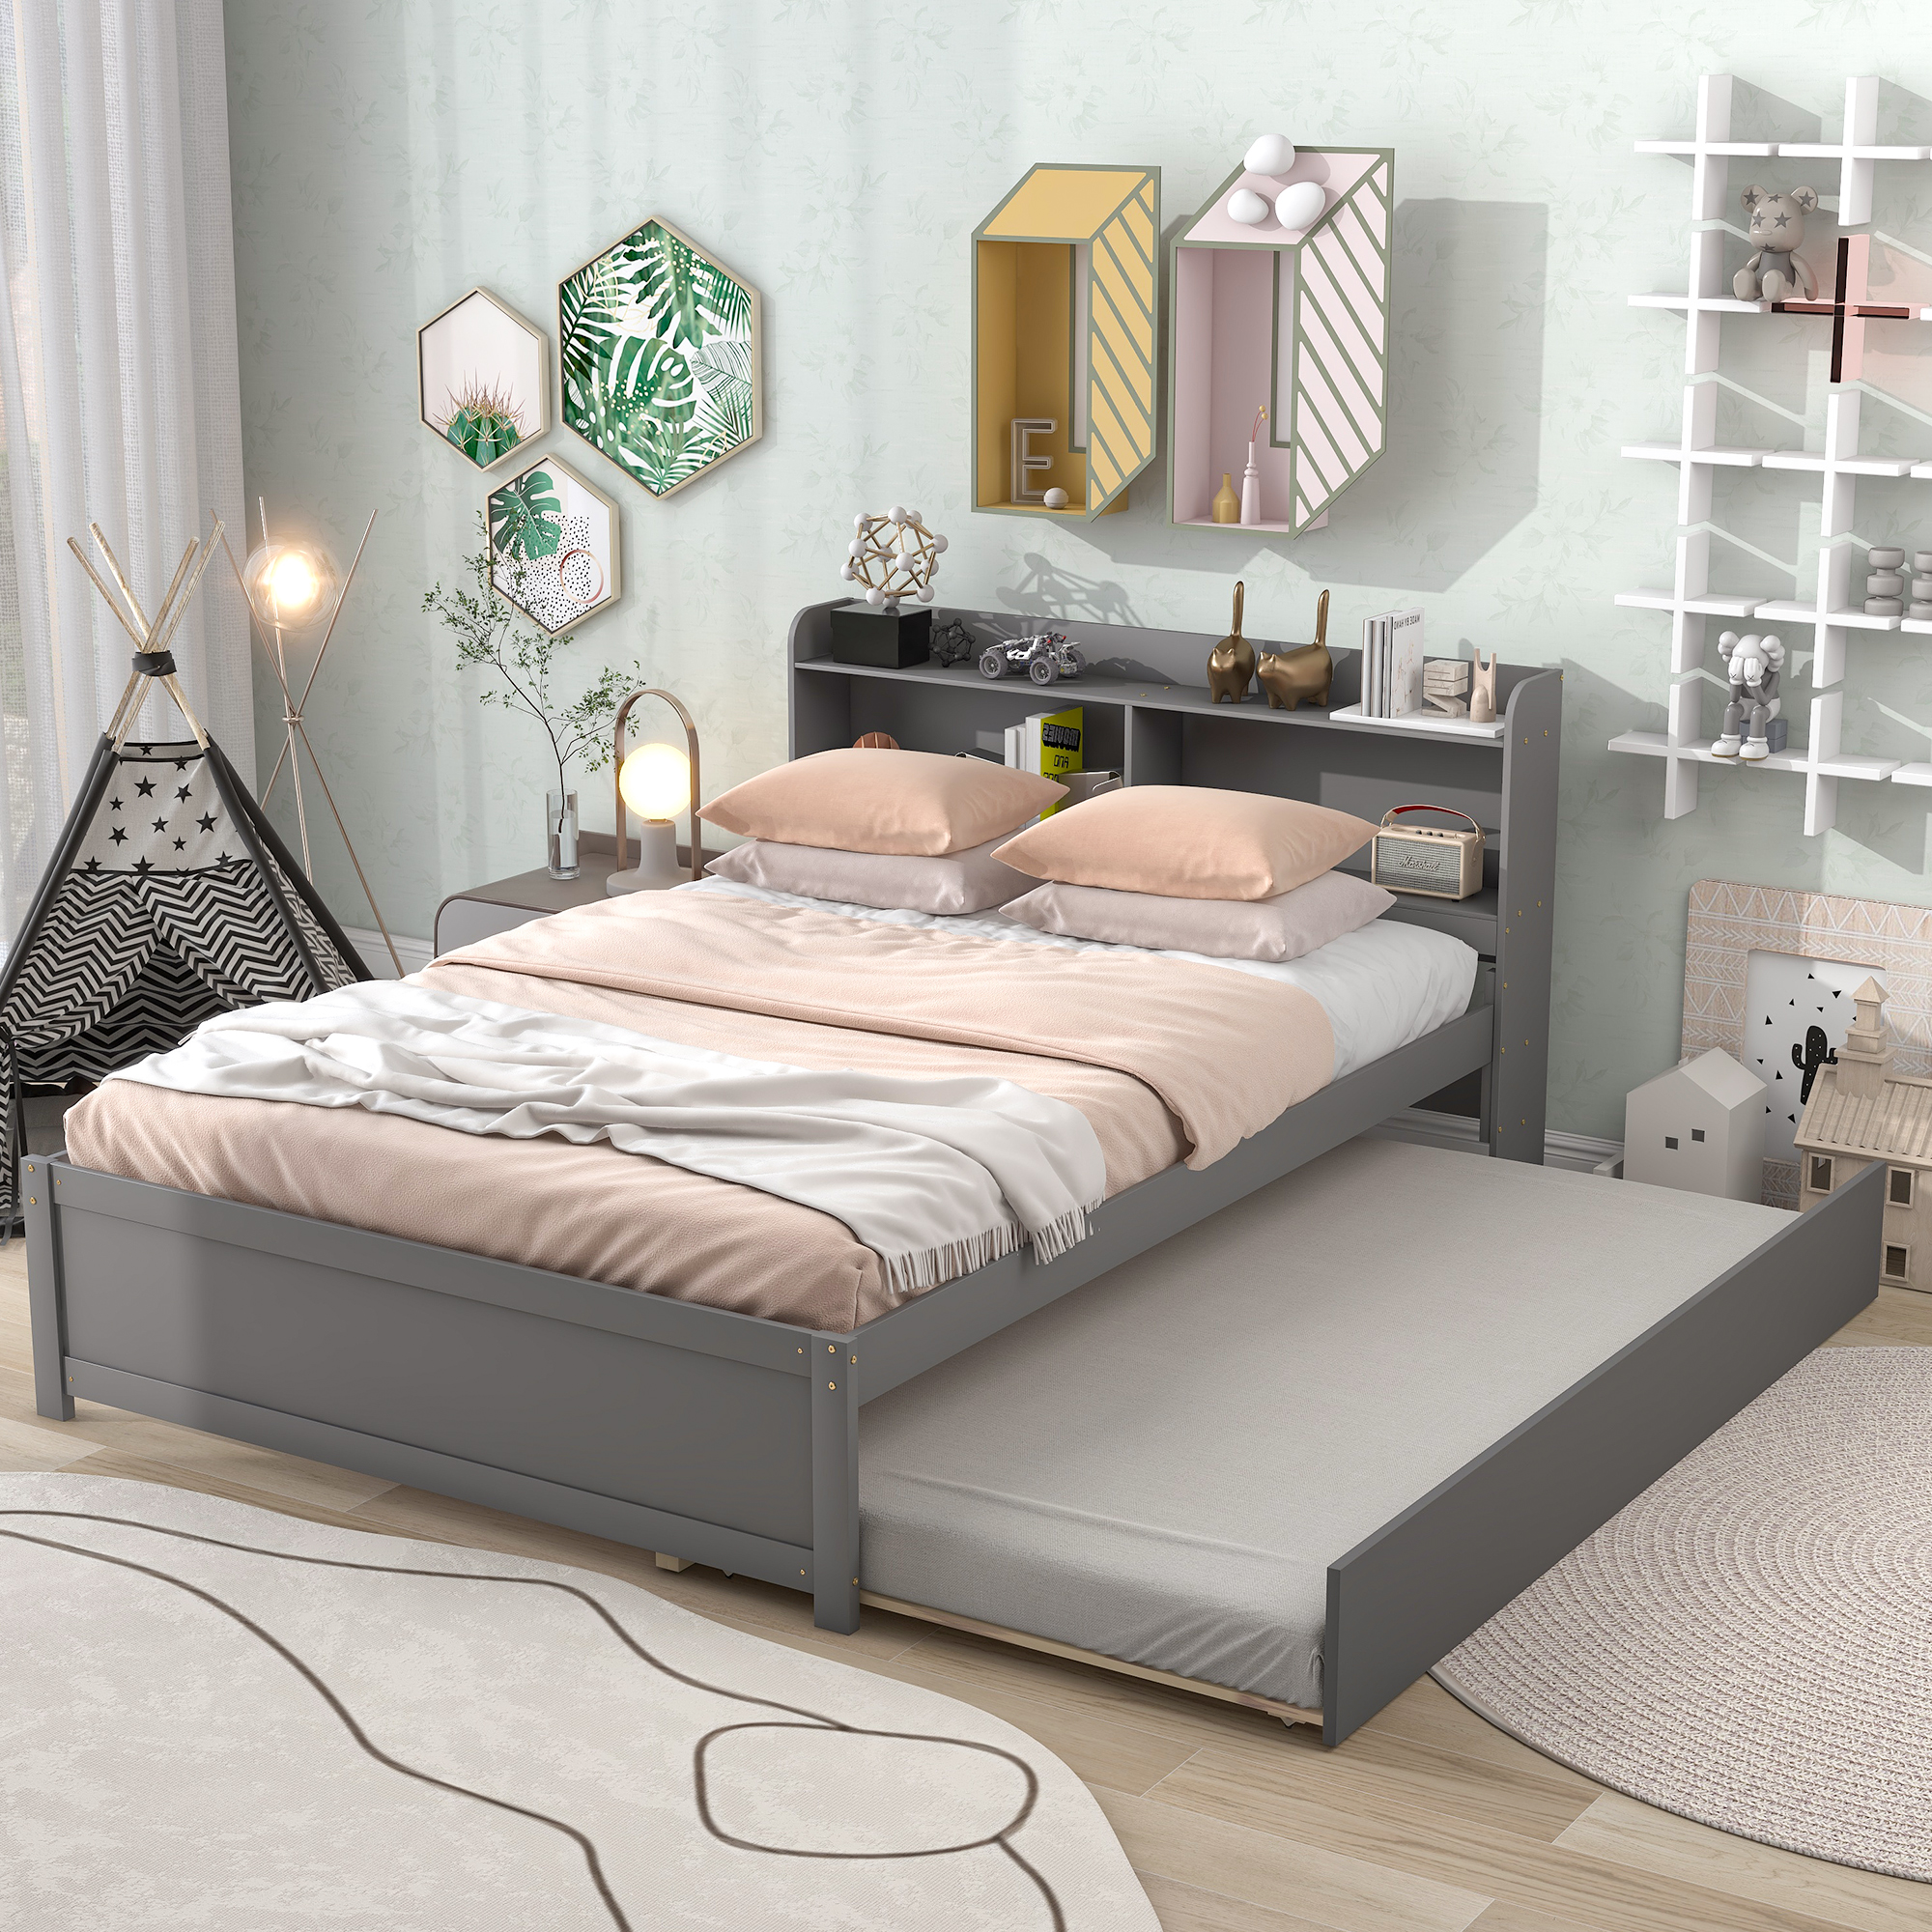 SYNGAR Gray Full Bed Frame with Trundle and Storage Bookcase, Kids Platform Full Size Bed with Pull Out Trundle, Solid Wood Trundle Bed with Headboard and Footboard, No Box Spring Needed - image 1 of 12